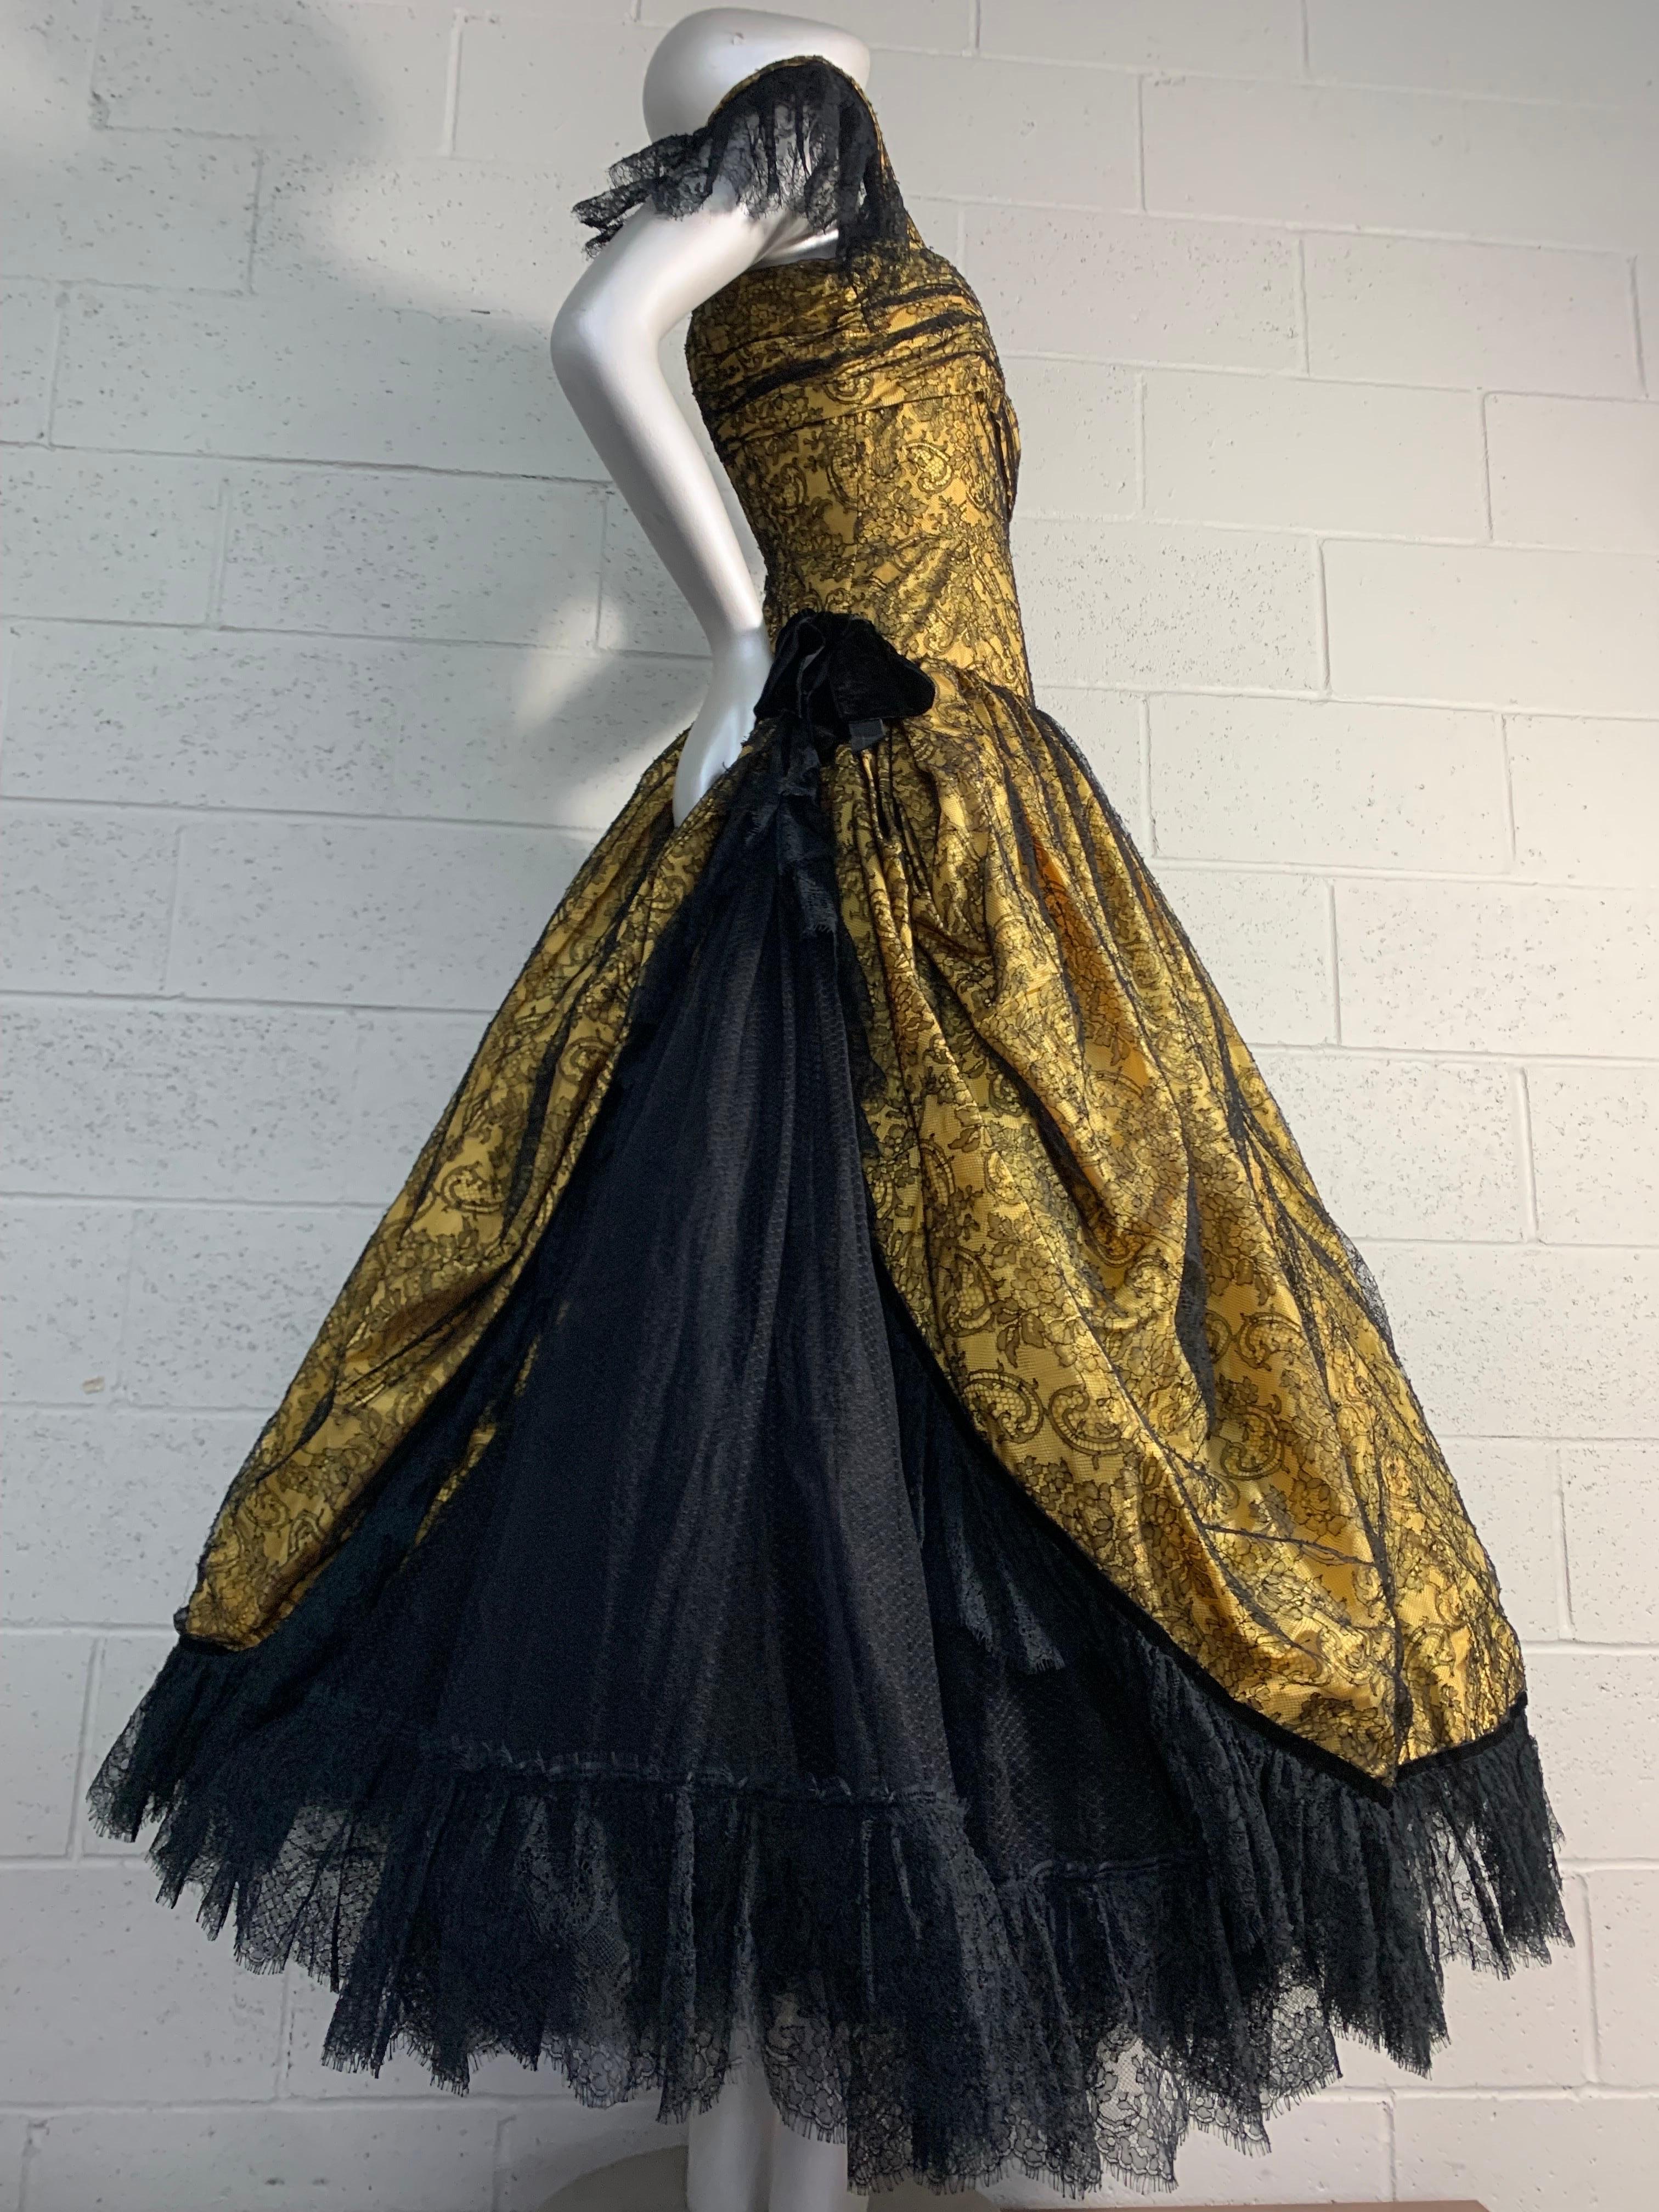 1980s Jean-Louis Scherrer Yellow Silk & Chantilly Lace Voluminous Ballet-Lenth Gown: Antibellum silhouette with boned bodice and structured underpinnings in skirt for volume. Matching long stole included. Numbered couture piece. US size 6.